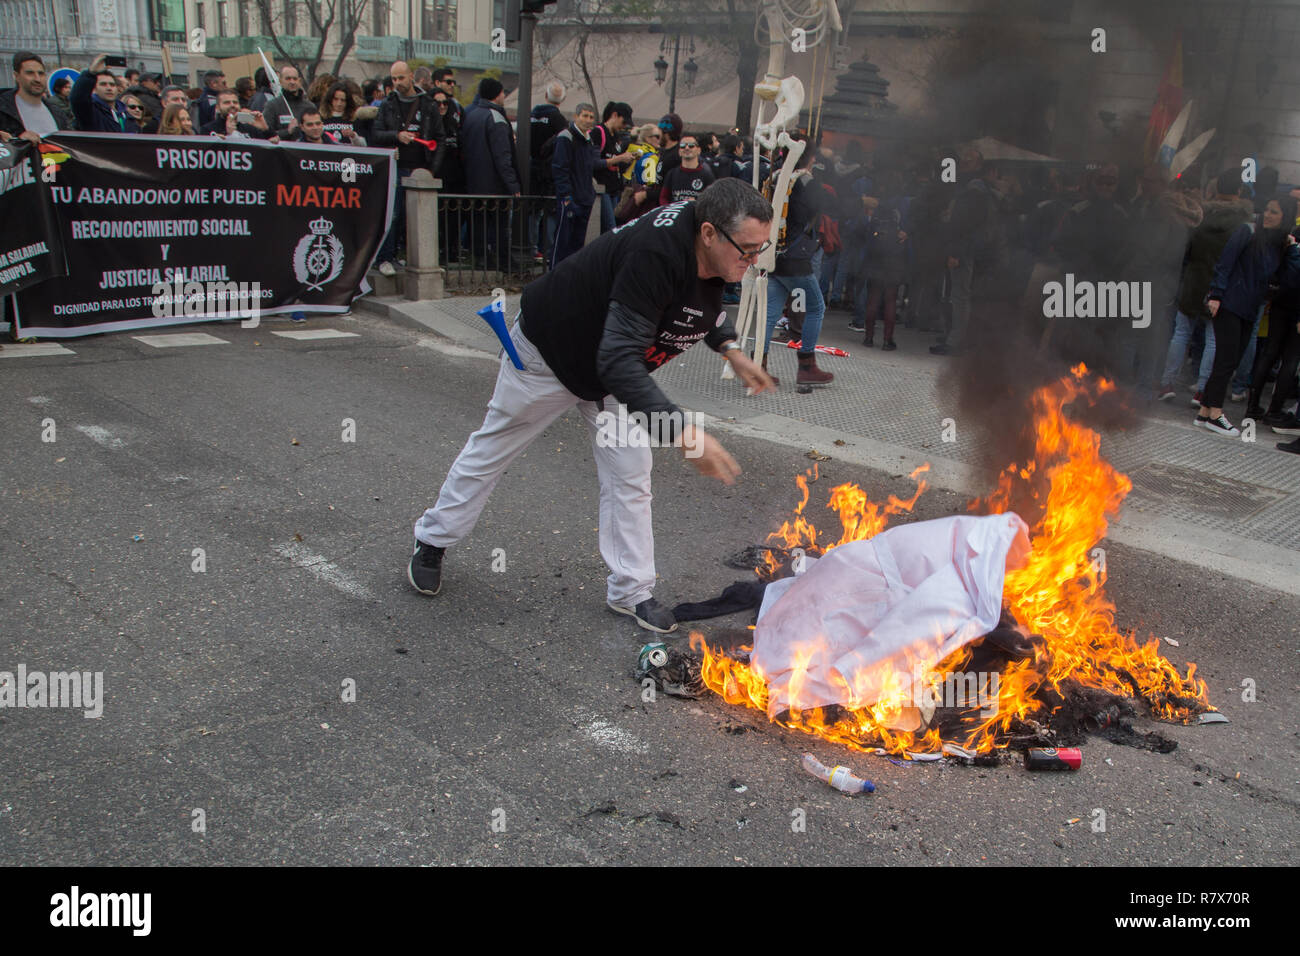 Prison worker seen burning his working clothes in front of the General Secretariat of Penitentiary Institutions during the protest. Hundreds of striking prison workers from all parts of Spain protest on the streets of Madrid to demand a salary improvement and an increase in the workforce. Stock Photo